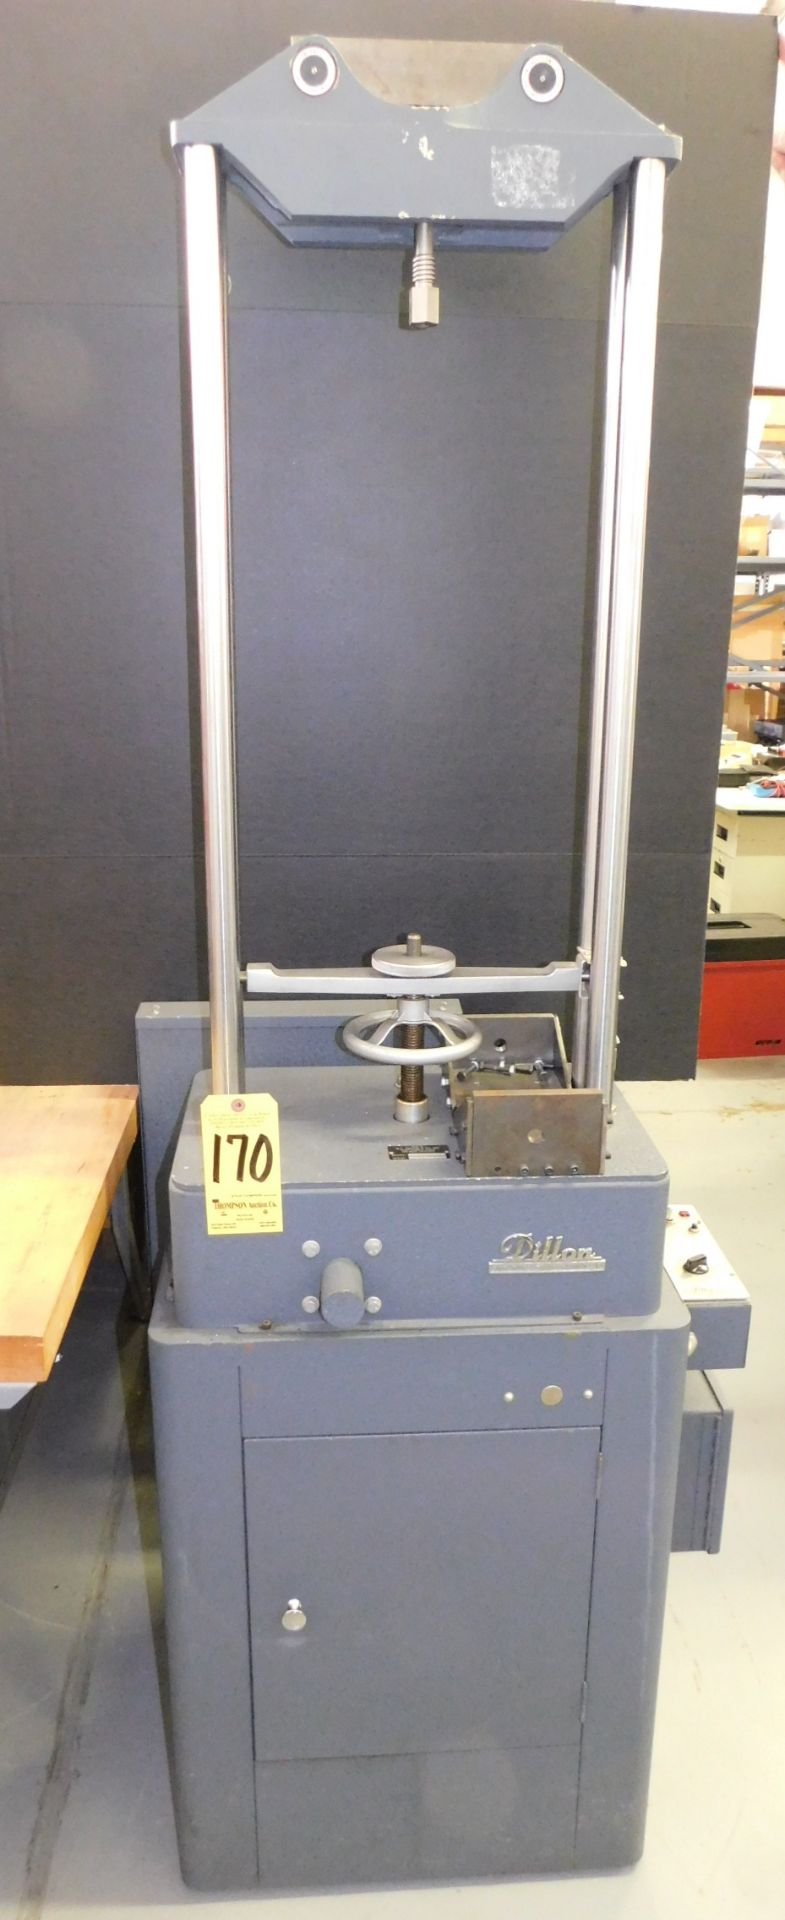 Dillon Model LW Tensile Tester, s/n 6399, Variable Speed Control, with Attachments and Stages